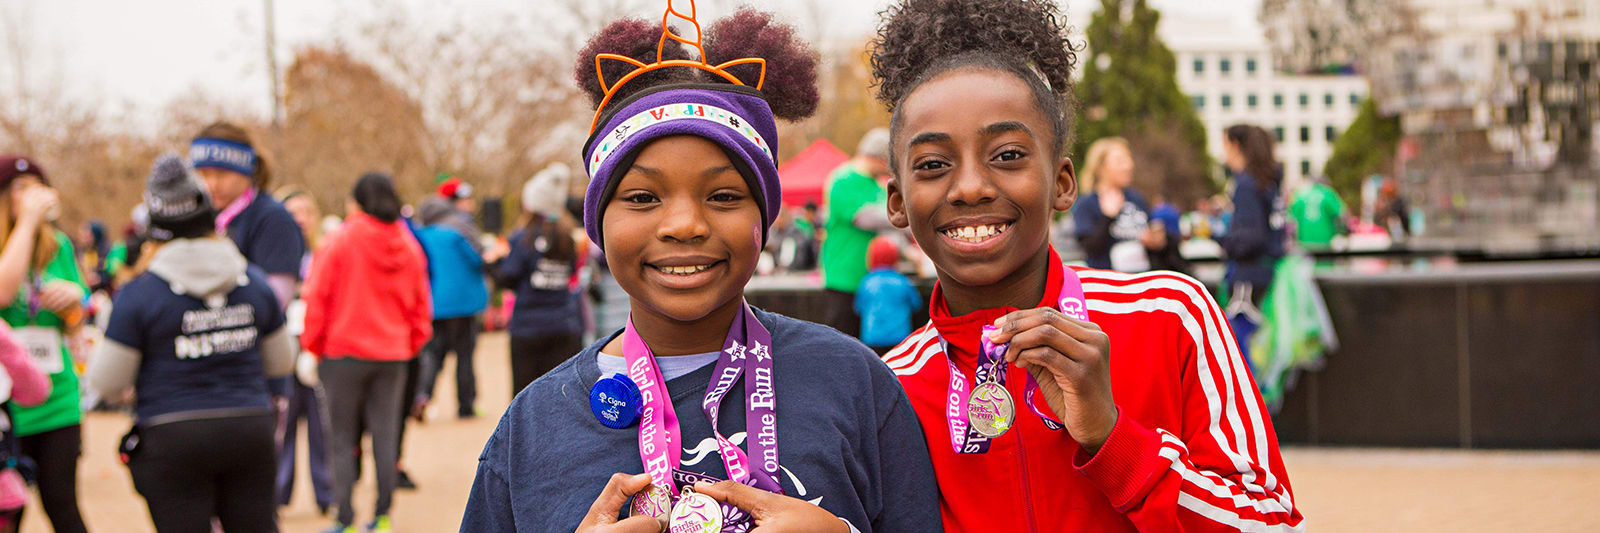 BREAKING BARRIERS WITH 'GIRLS ON THE RUN®'